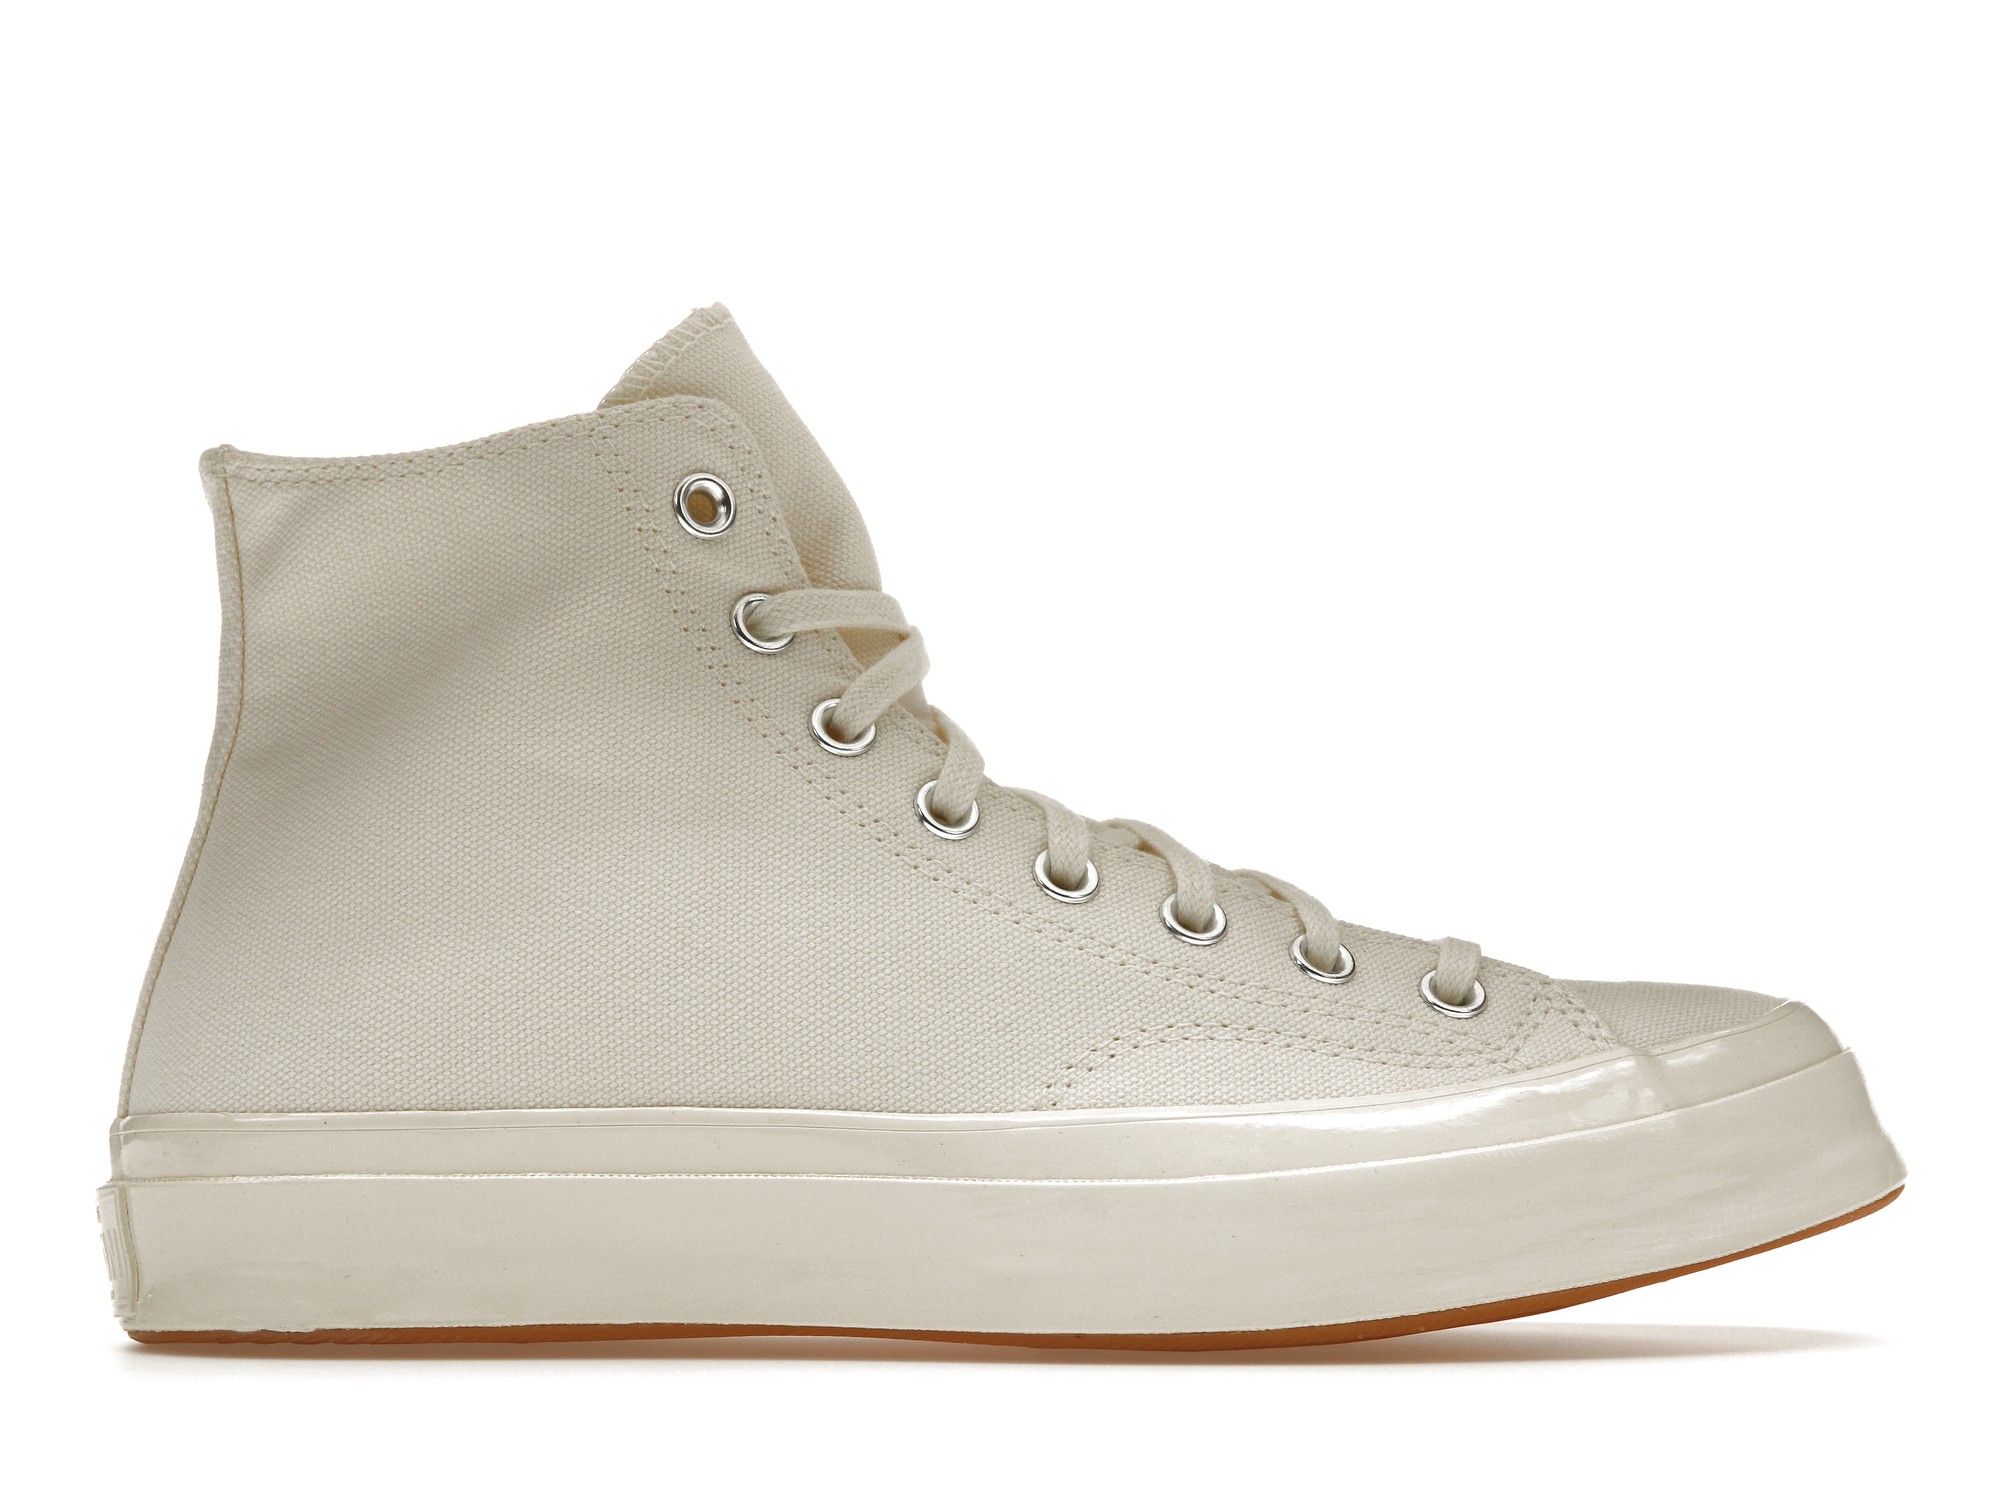 Converse Chuck Taylor All Star Hi Mixed Material sneakers in white | ASOS